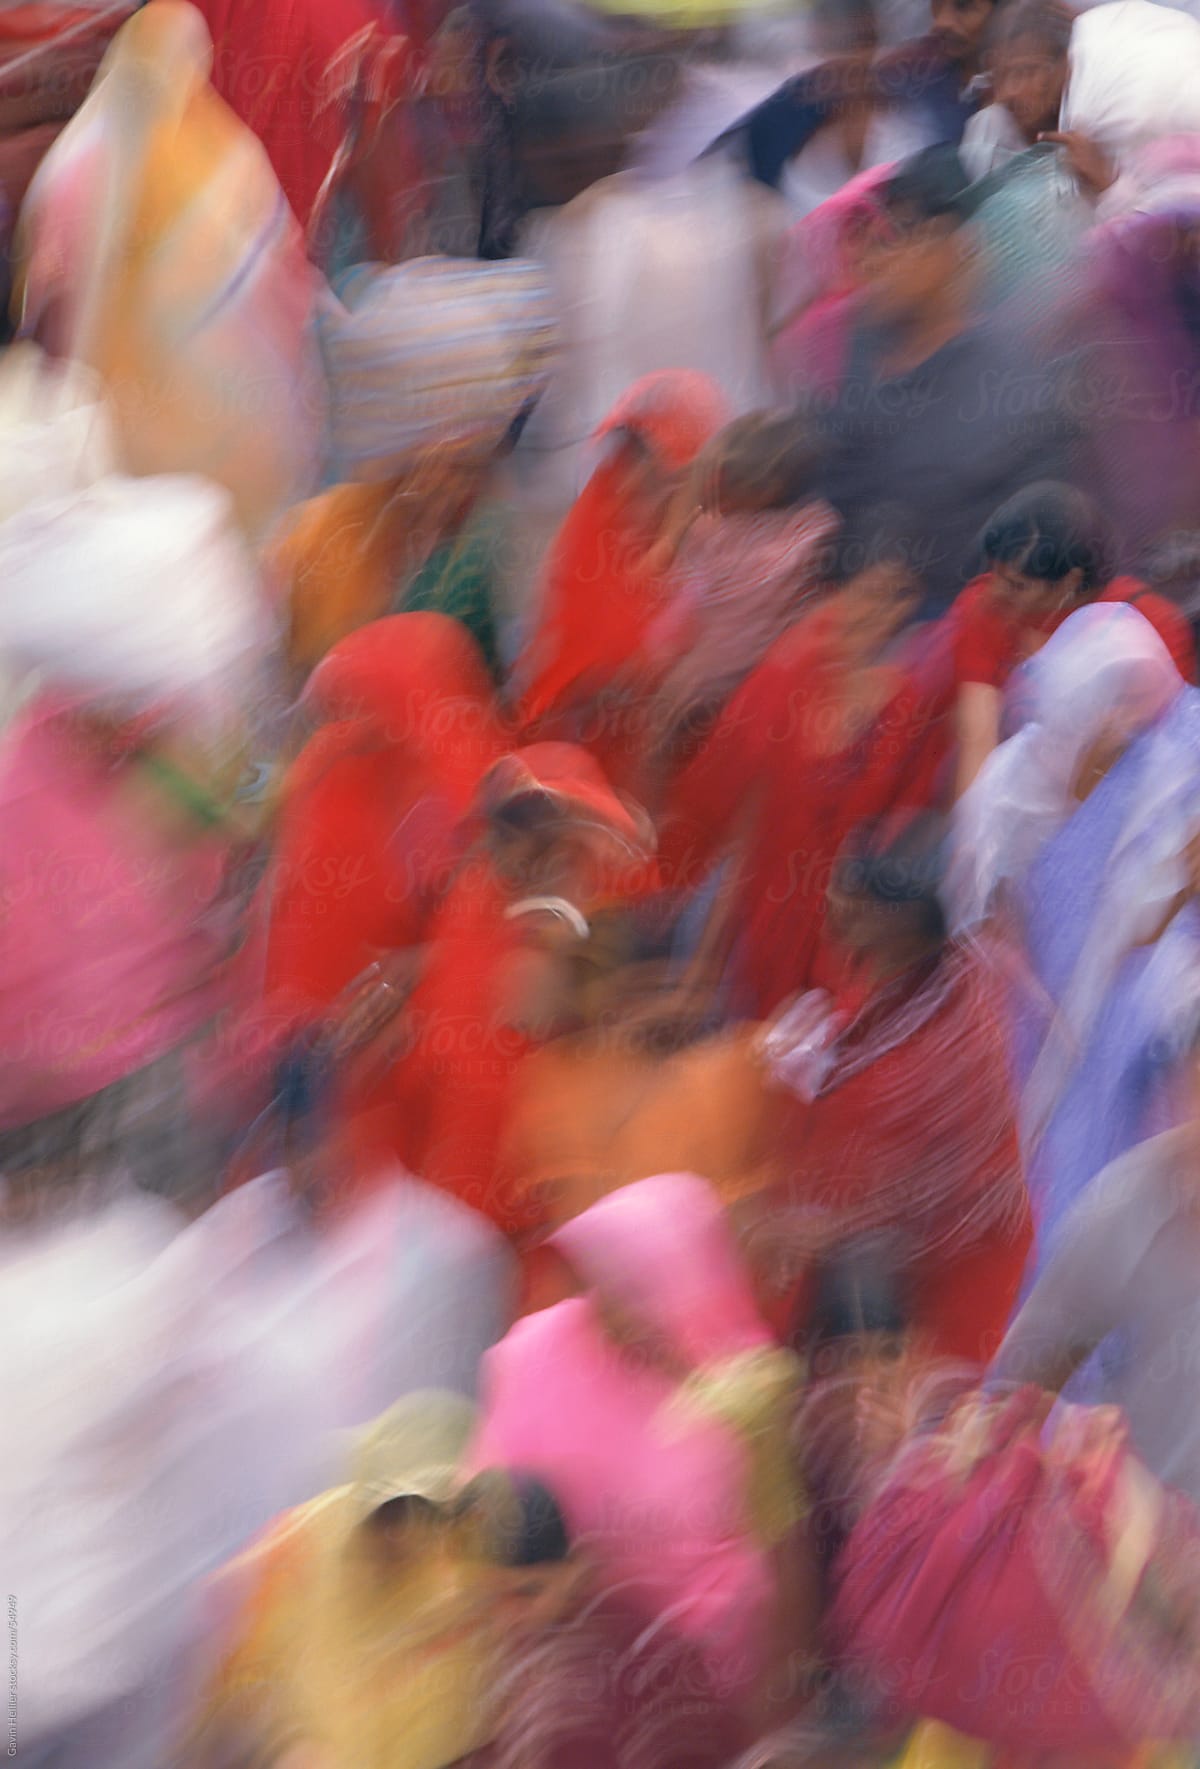 Blurred motion, crowd of people in colourful Saris, New Delhi, Delhi, India